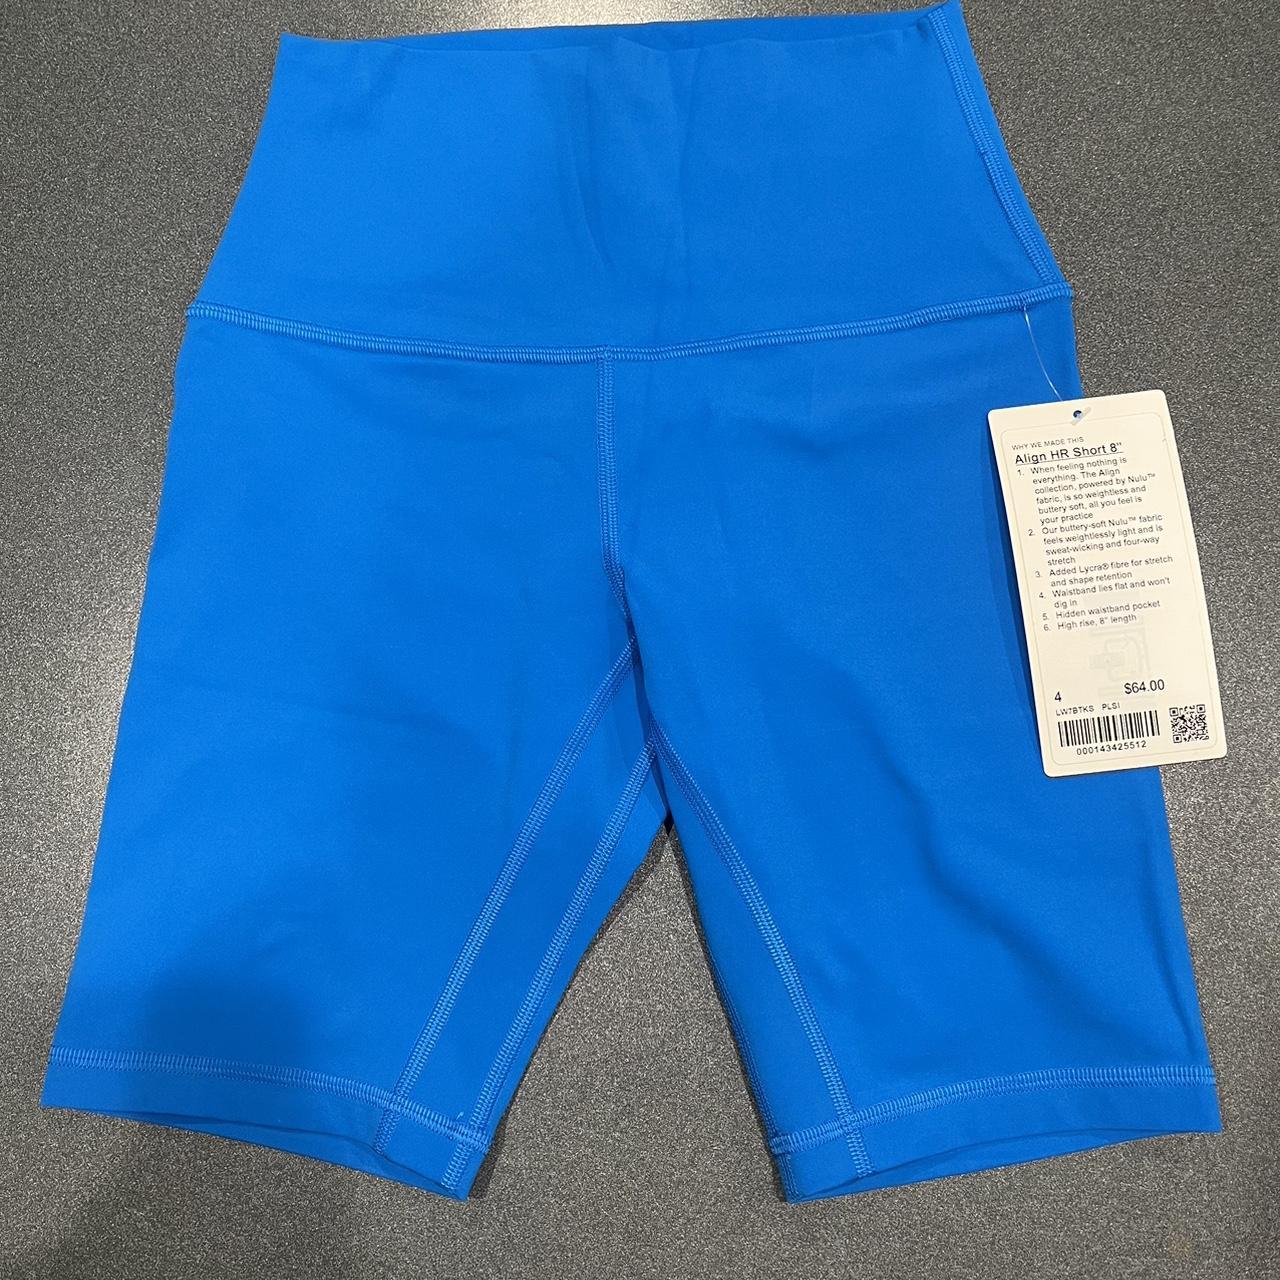 New Align Shorts! Align HR Short 8” and Align HR 6” in Nulu Cool